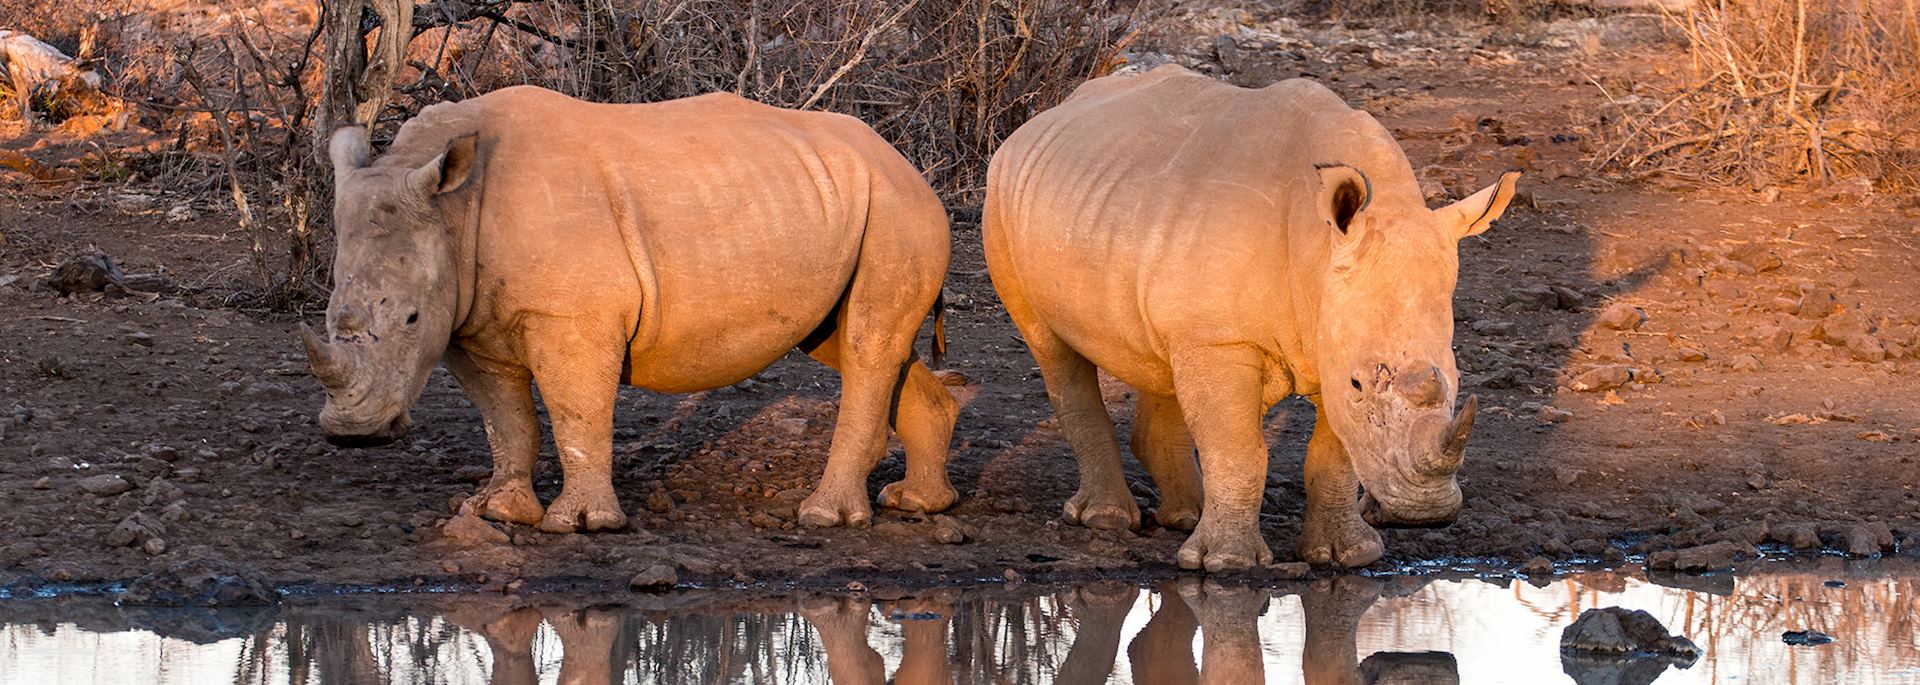 White rhinos, Madikwe Private Game Reserve, South Africa, by Chris Thompson